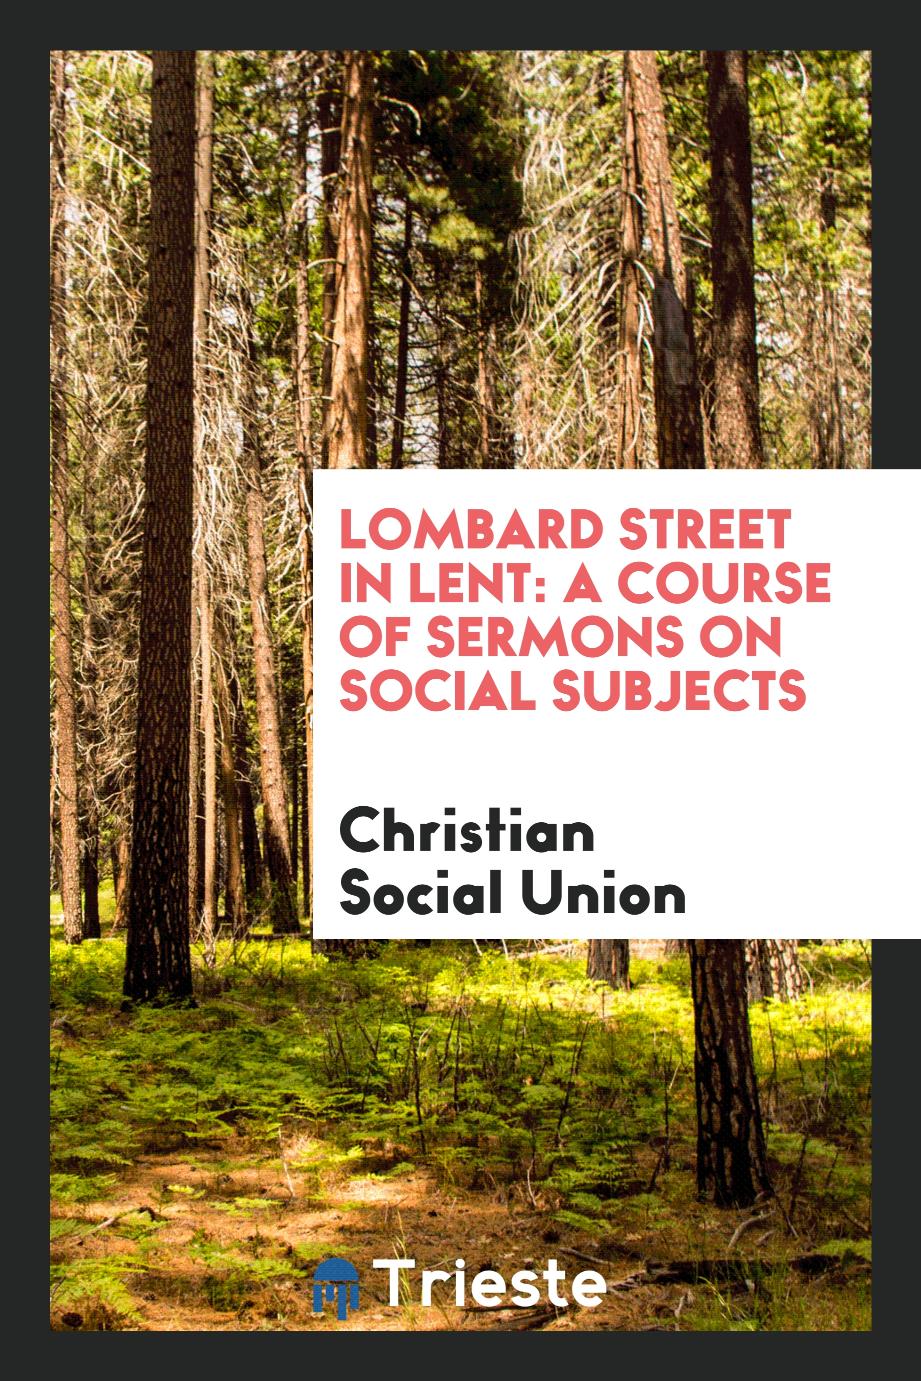 Lombard Street in Lent: A Course of Sermons on Social Subjects